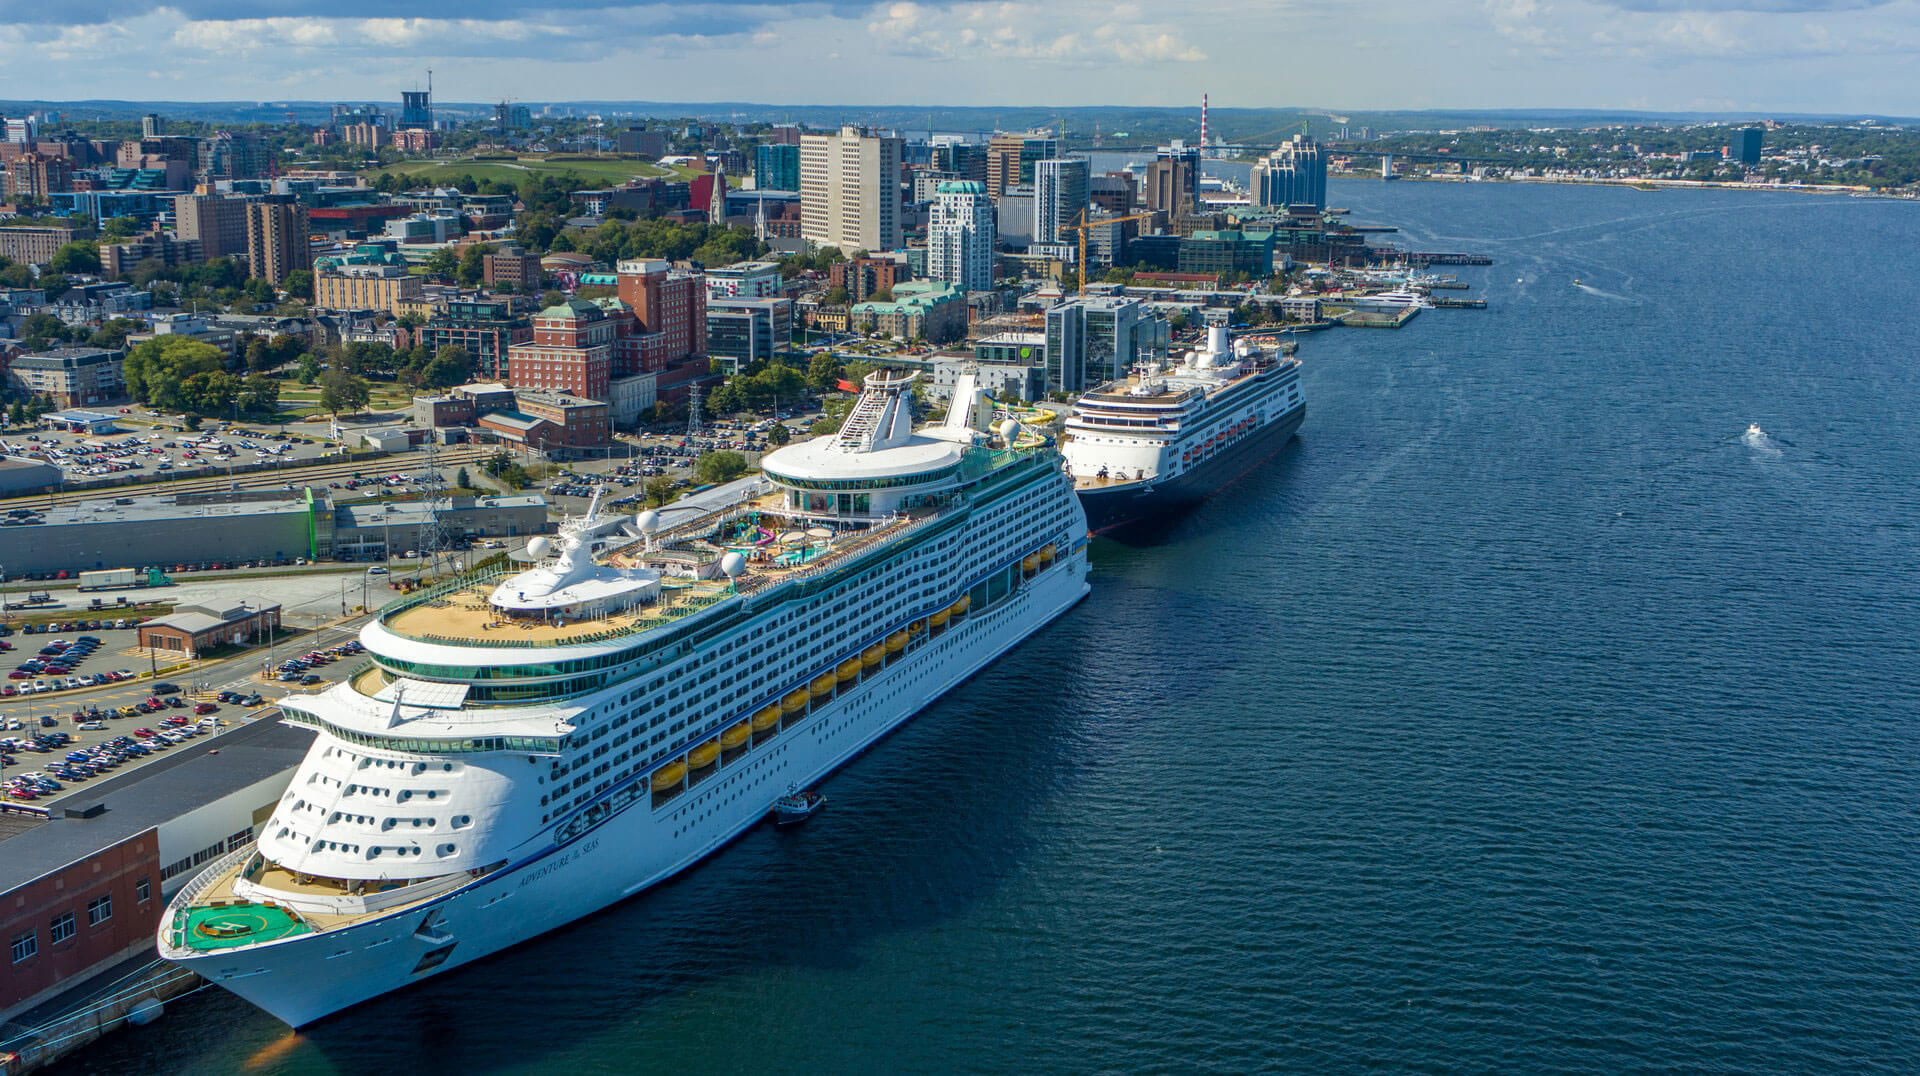 Aerial of two cruise ships moored near Pier 21. In the background is a sweeping aerial of downtown Halifax, Citadel Hill, and the Macdonald Bridge.